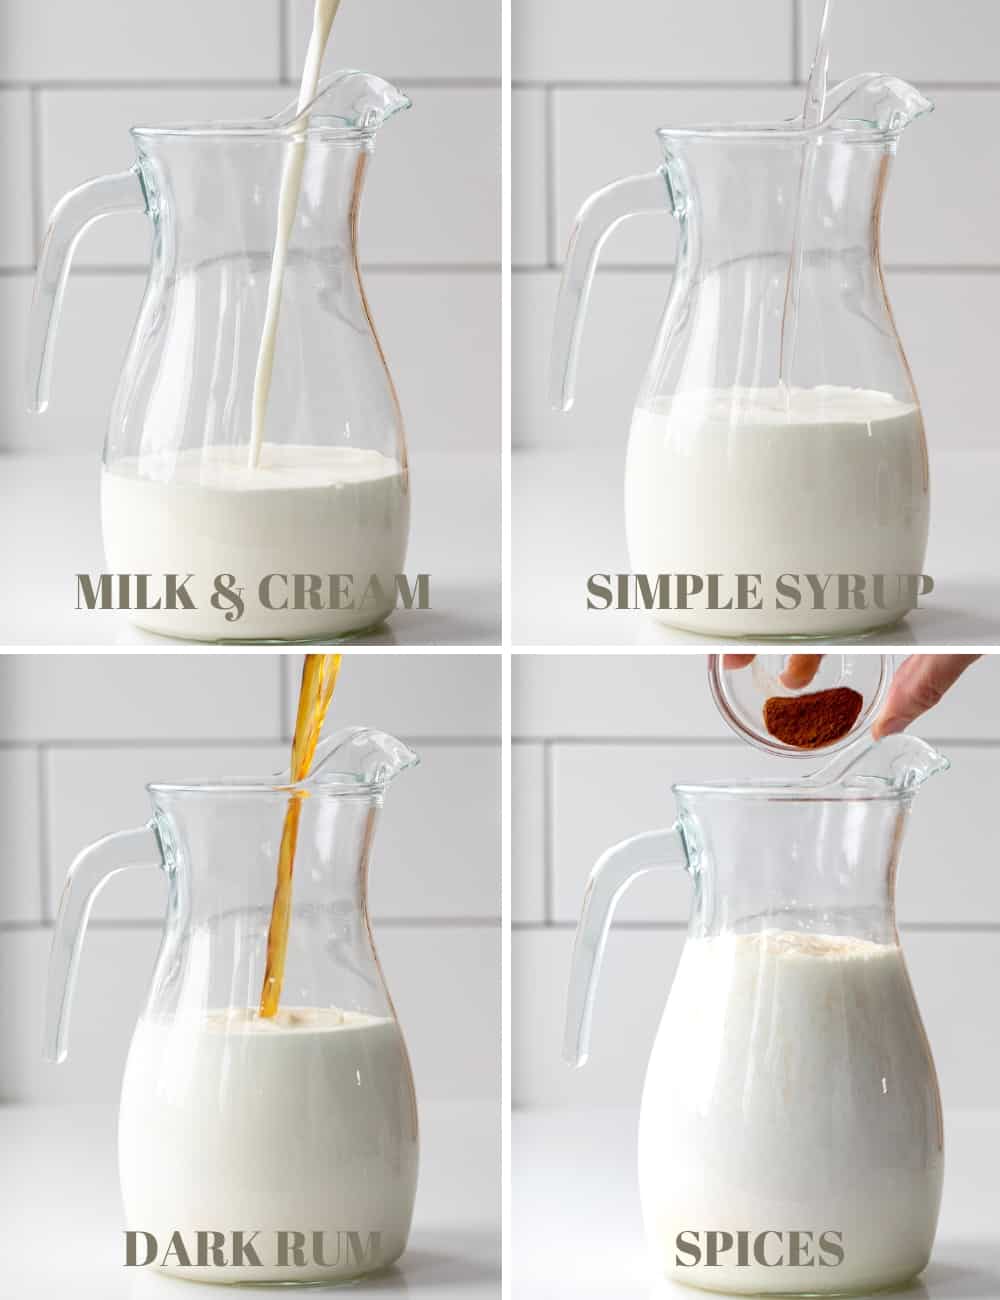 Steps of adding milk, cream, simple syrup, rum, and spices to a glass pitcher to make homemade rumchata.